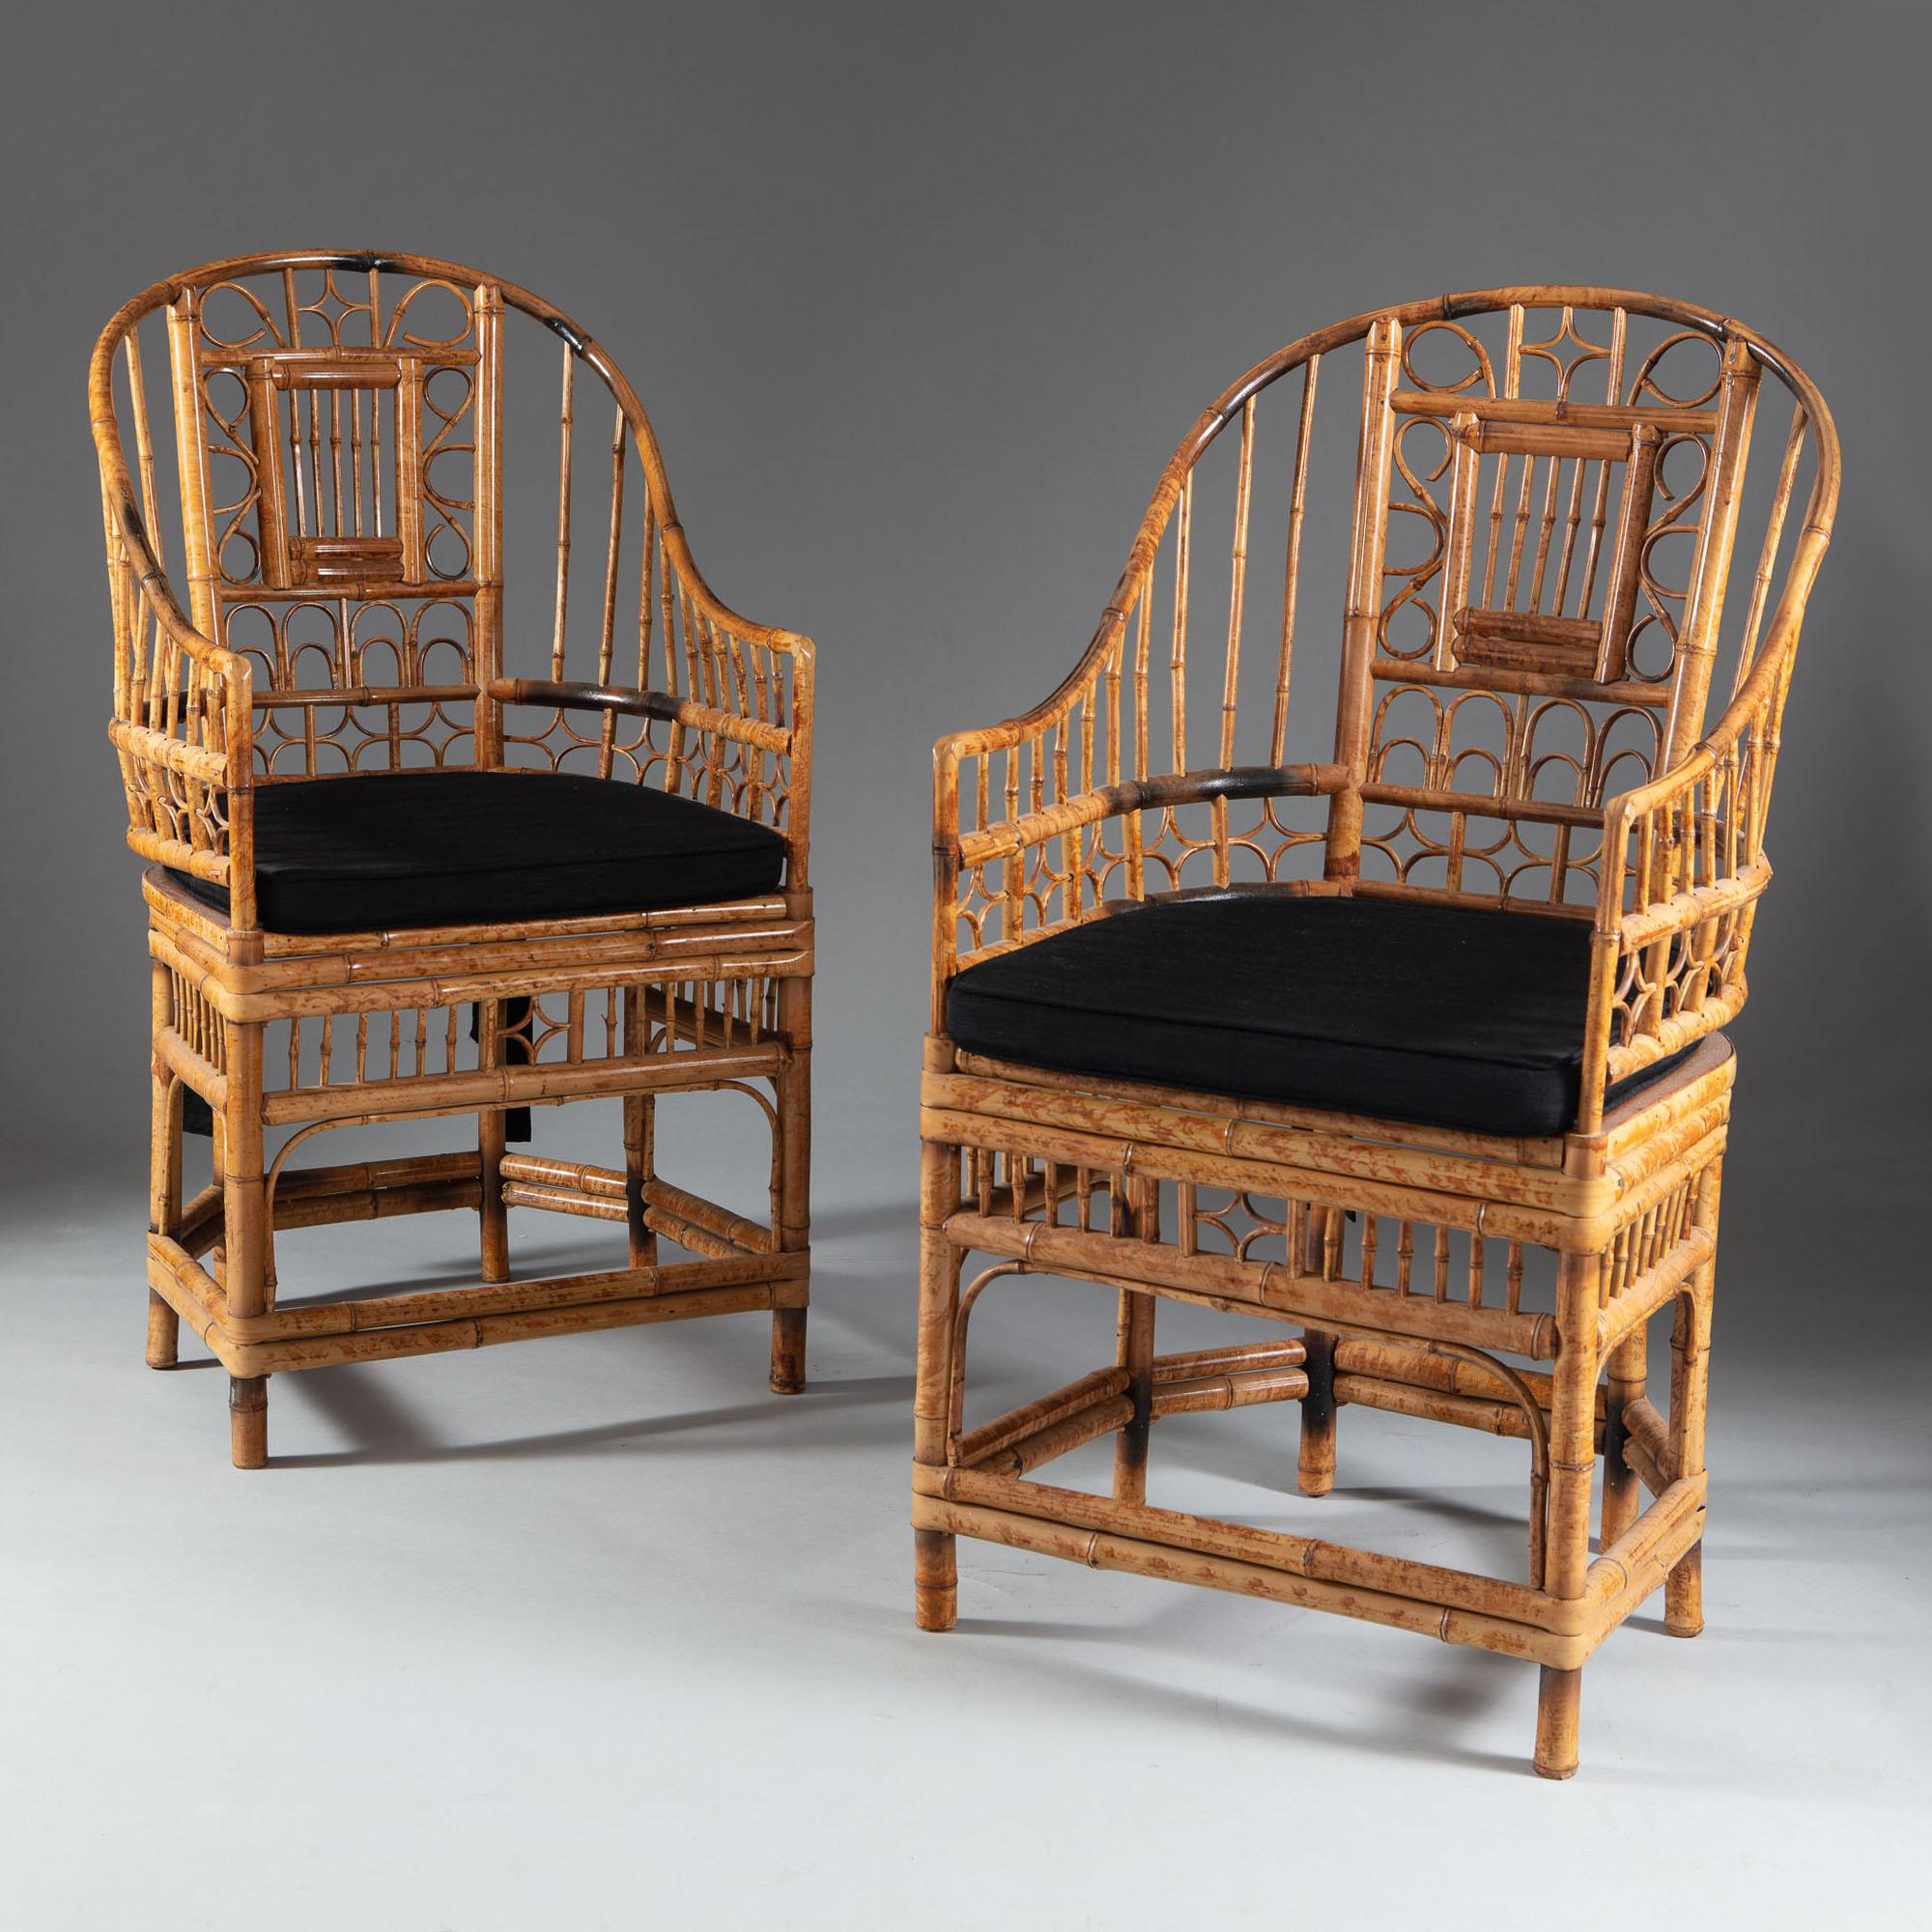 A set of four mid-20th century bamboo armchairs, the horseshoe backs with intricate scrollwork decoration, raised upon legs with conjoining stretchers. Together with squab cushion seats.

These chairs show stylistic influence of the suites of